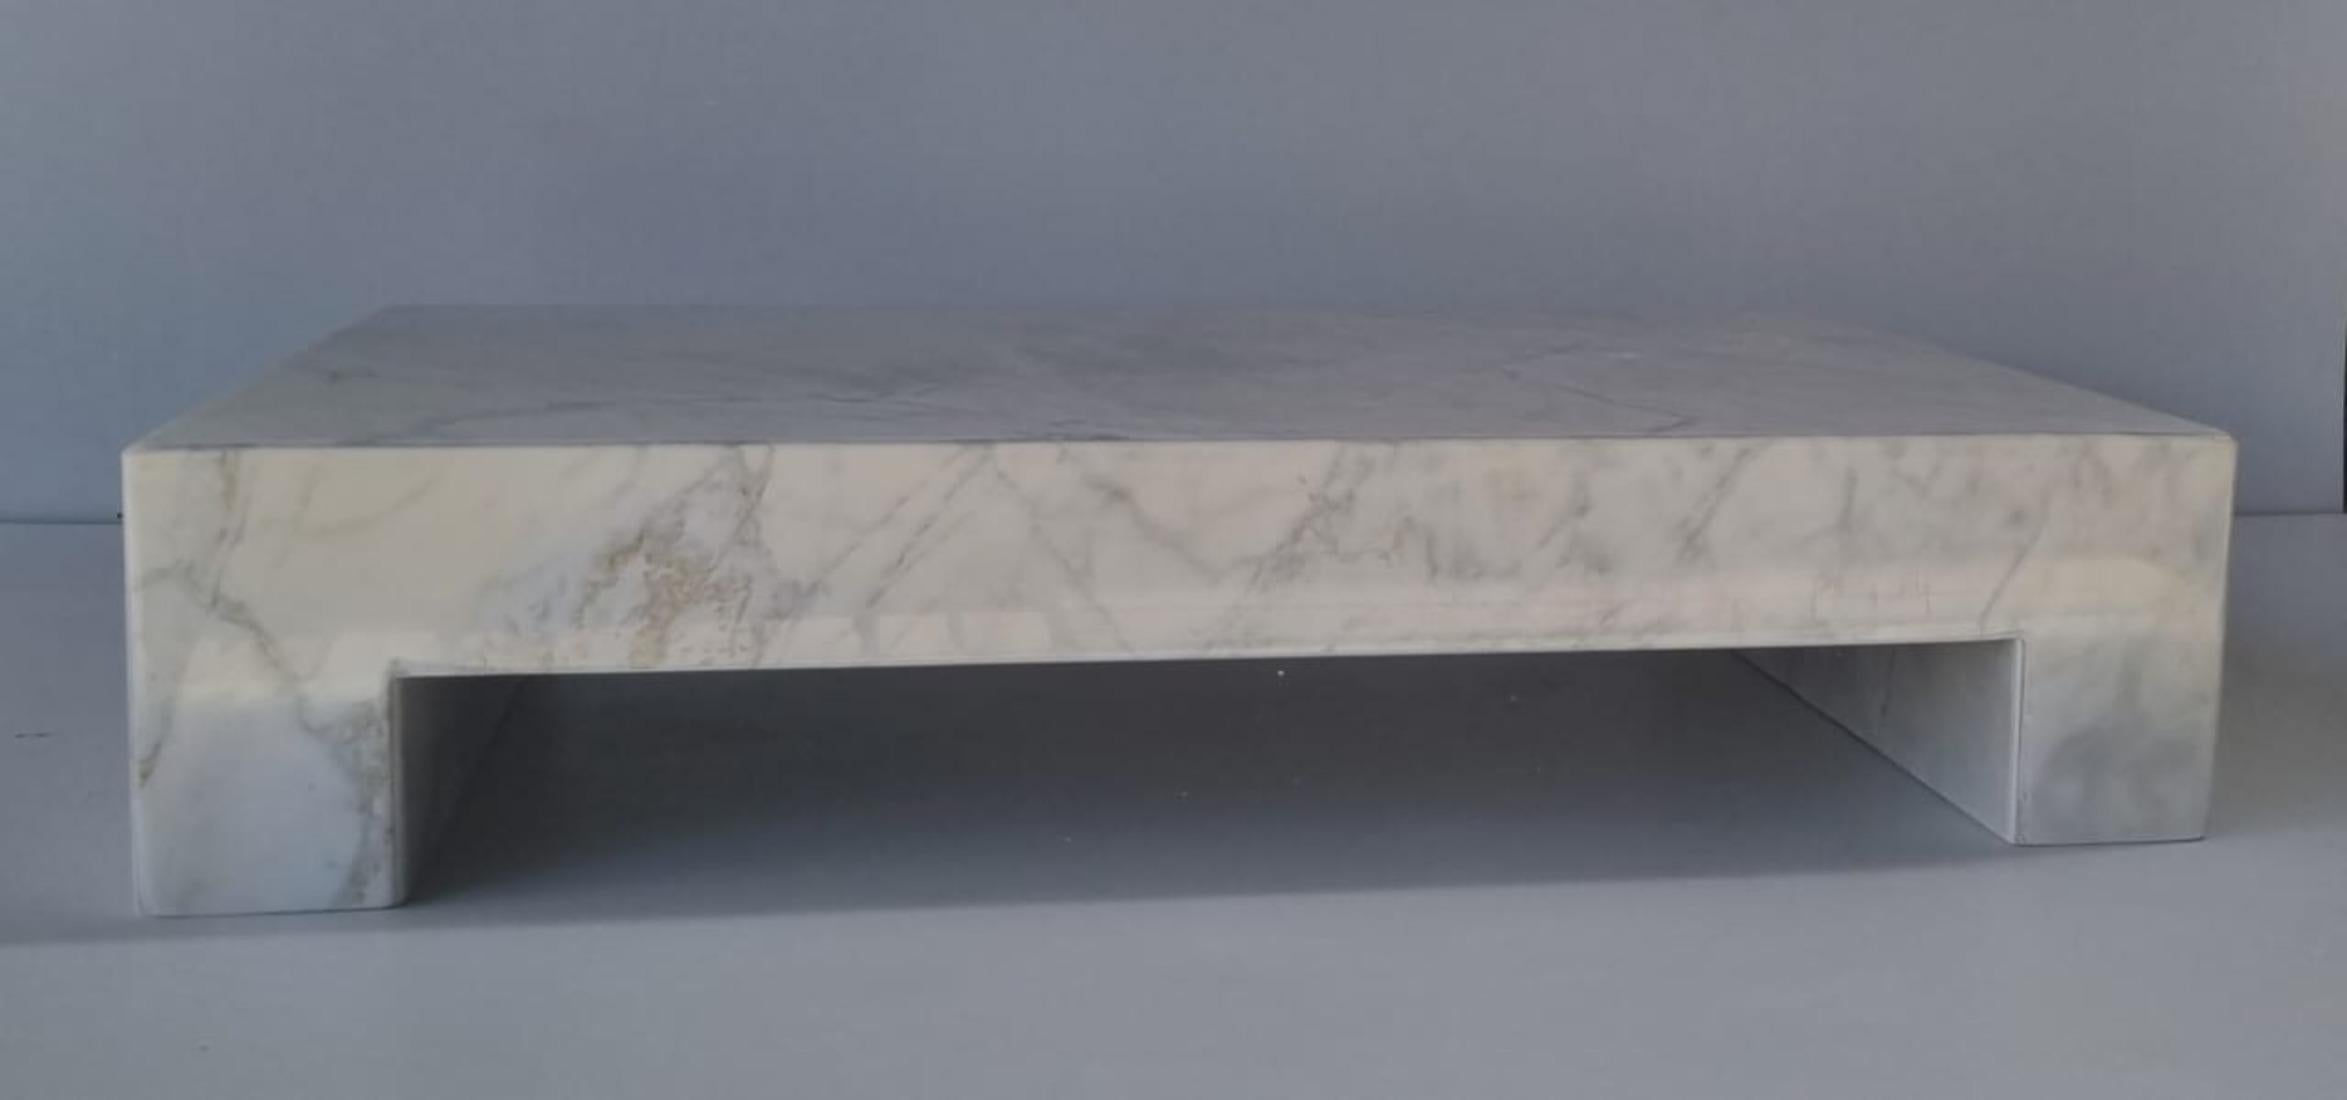 Introducing our exquisite, 100% Carrara Marble Coffee Table – a captivating blend of timeless elegance and modern sophistication. Crafted from the finest Carrara marble, renowned for its pristine white color and subtle grey veining, this coffee